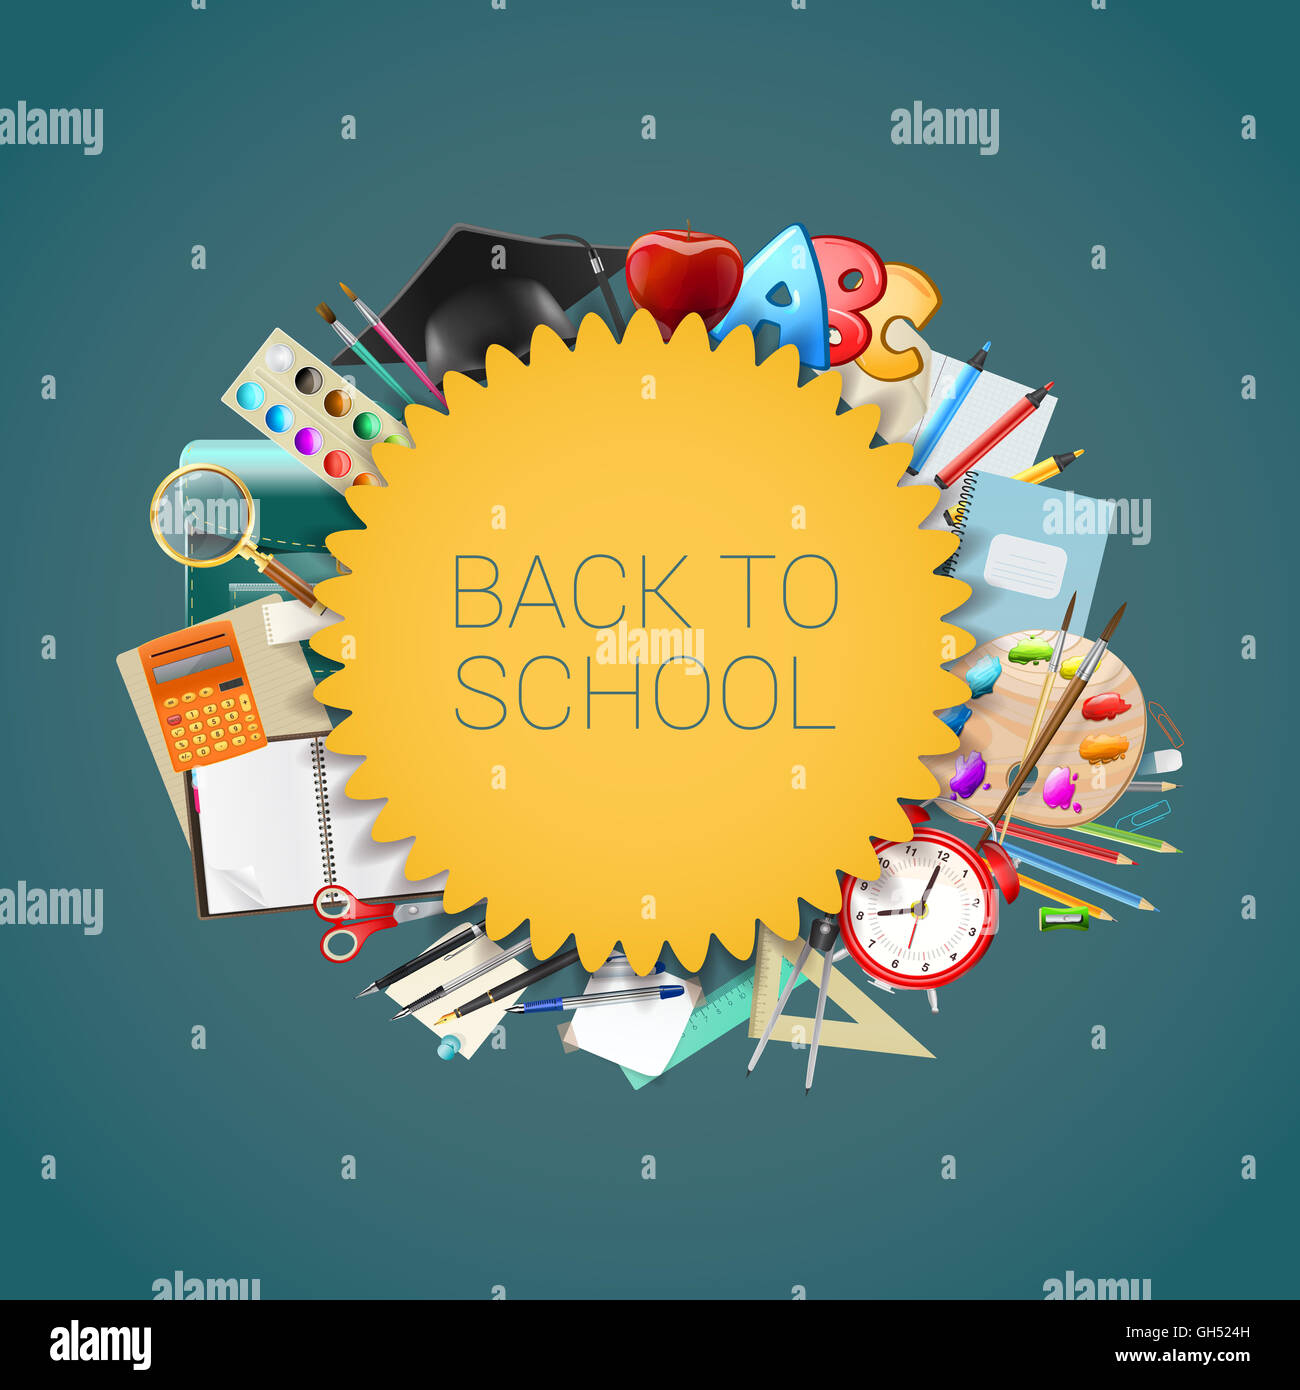 Back to school background with school supplies, education workplace accessories Stock Photo